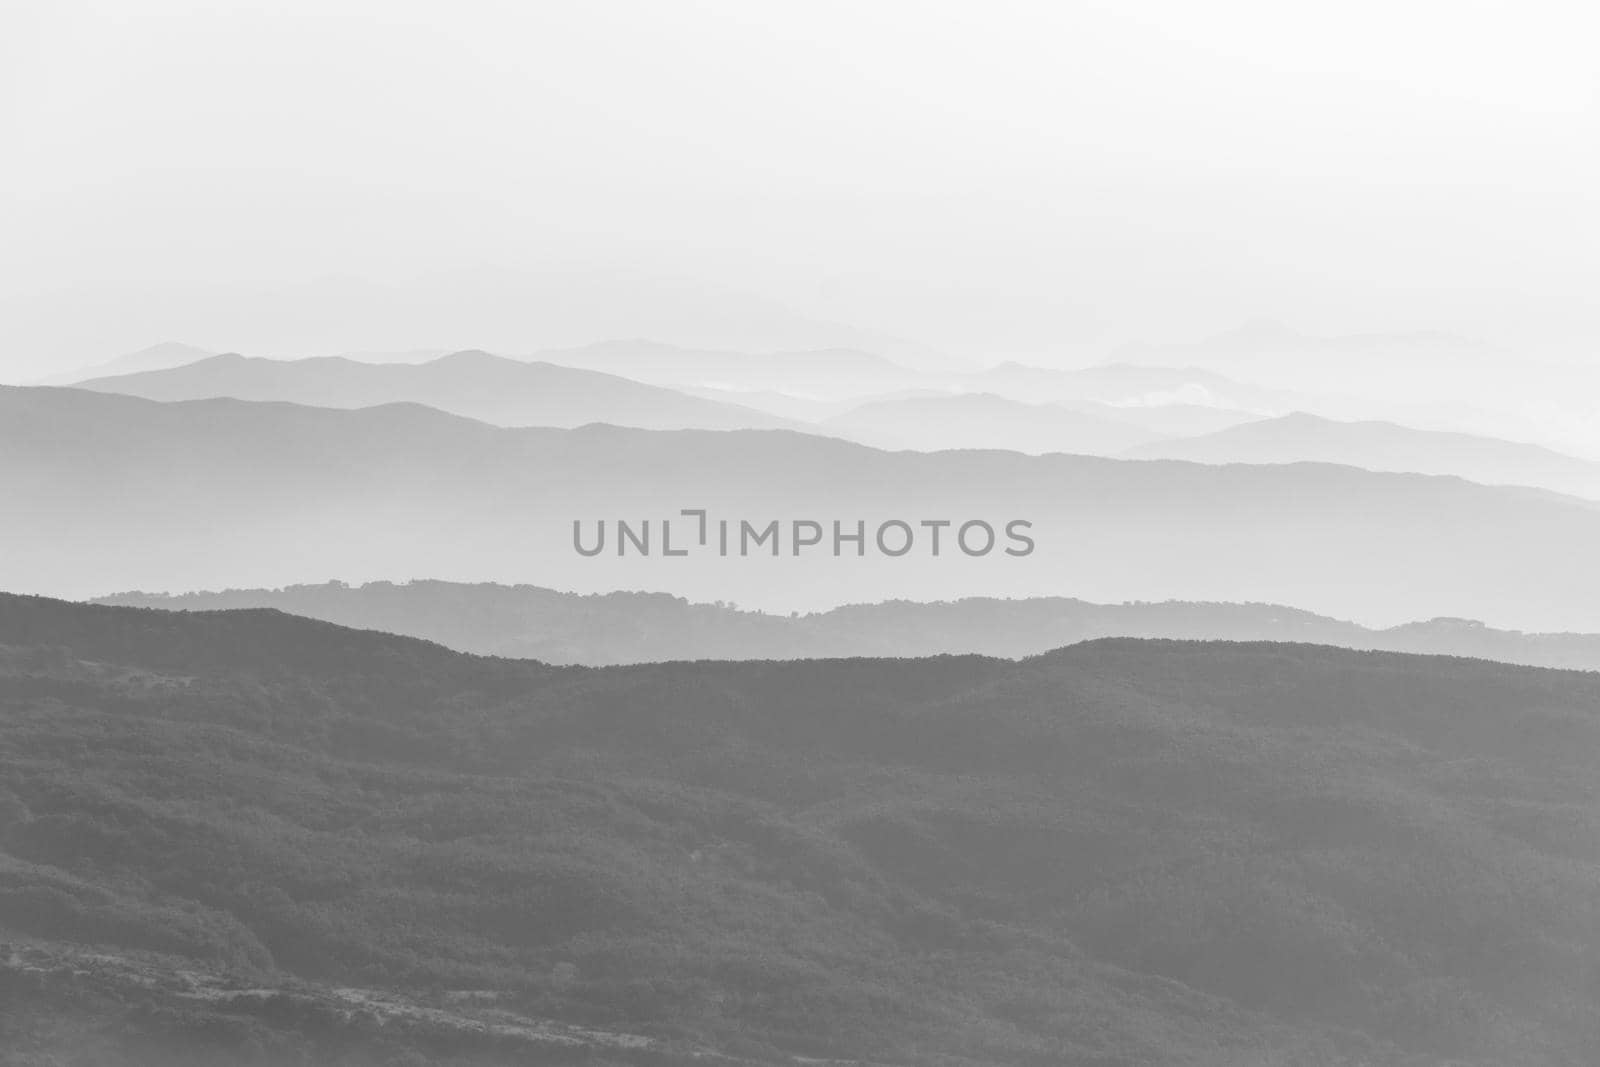 Vie of the misty valleys and the sky above Rocca del Crasto mountain, Sicily by mauricallari